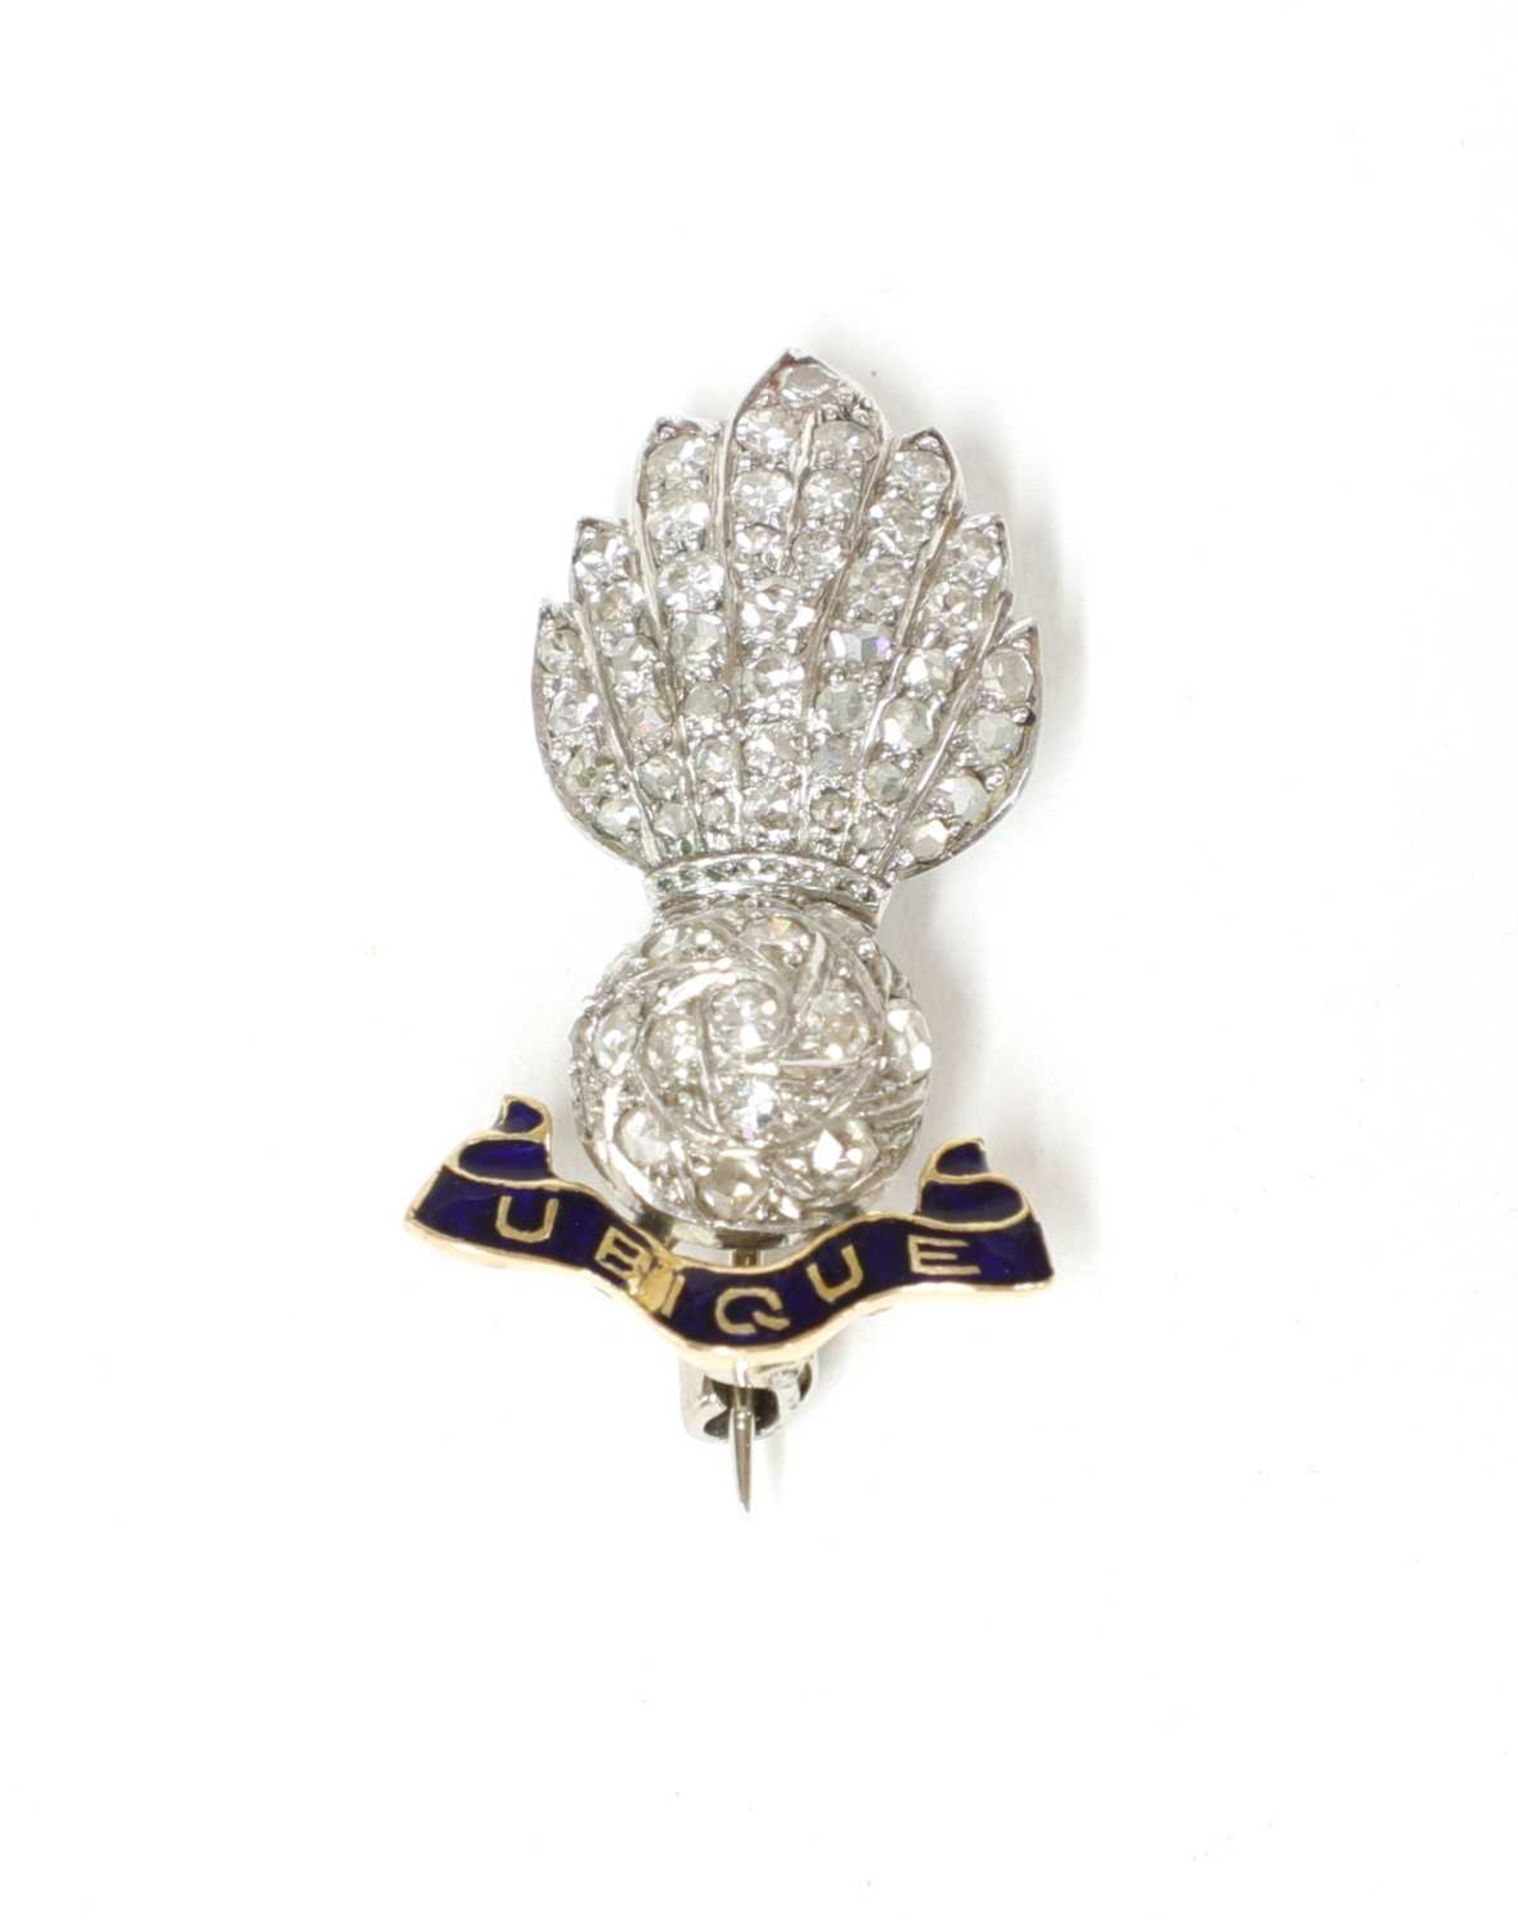 A gold and platinum, diamond and enamel Royal Artillery military sweetheart brooch,